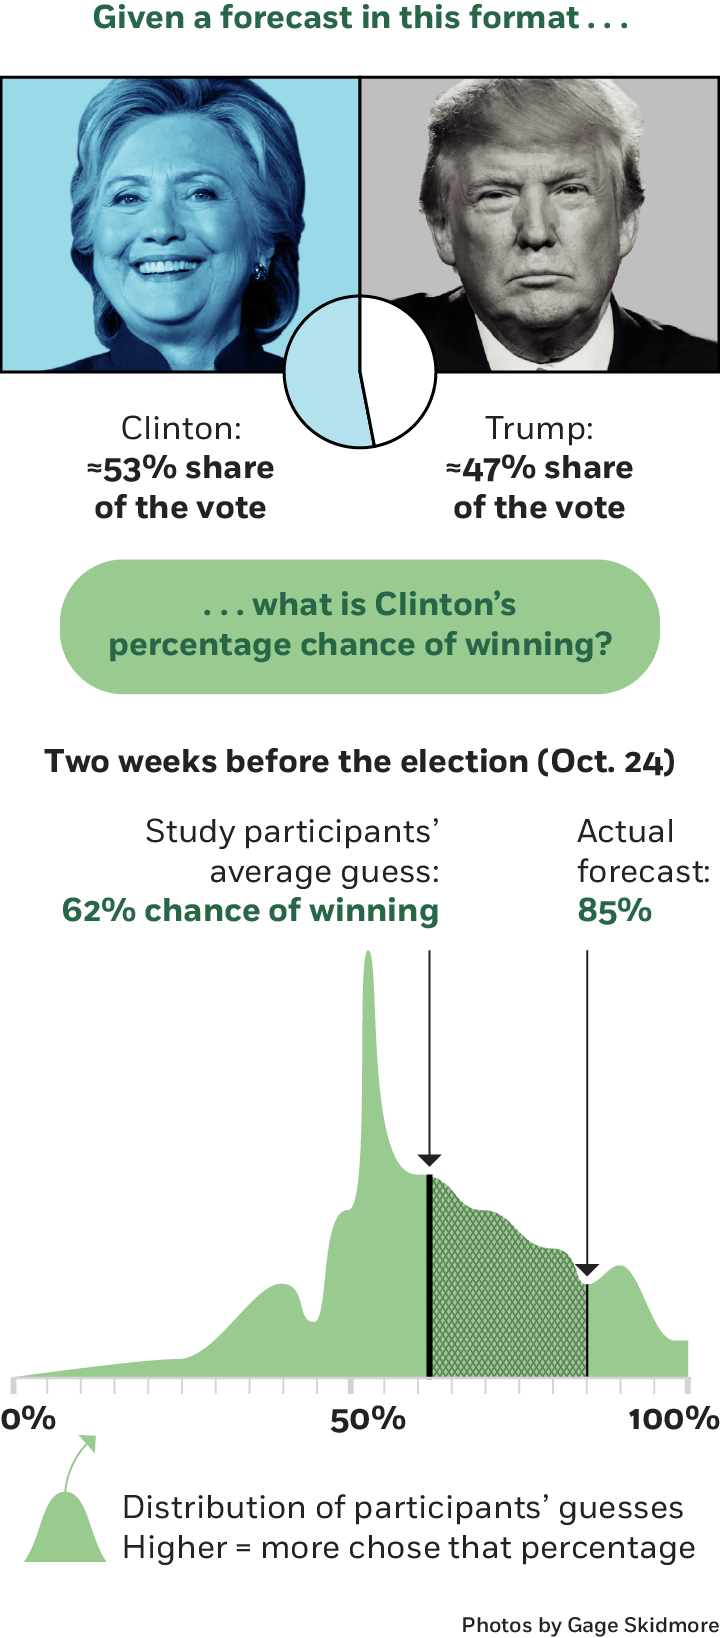 Area chart plotting the the distribution of people’s guesses of what Clinton’s percentage share of the vote would be, after being told that she had an eighty-five percent chance of winning. The average guess was a sixty-two percent share of the vote, whereas the correct answer was 53 percent.